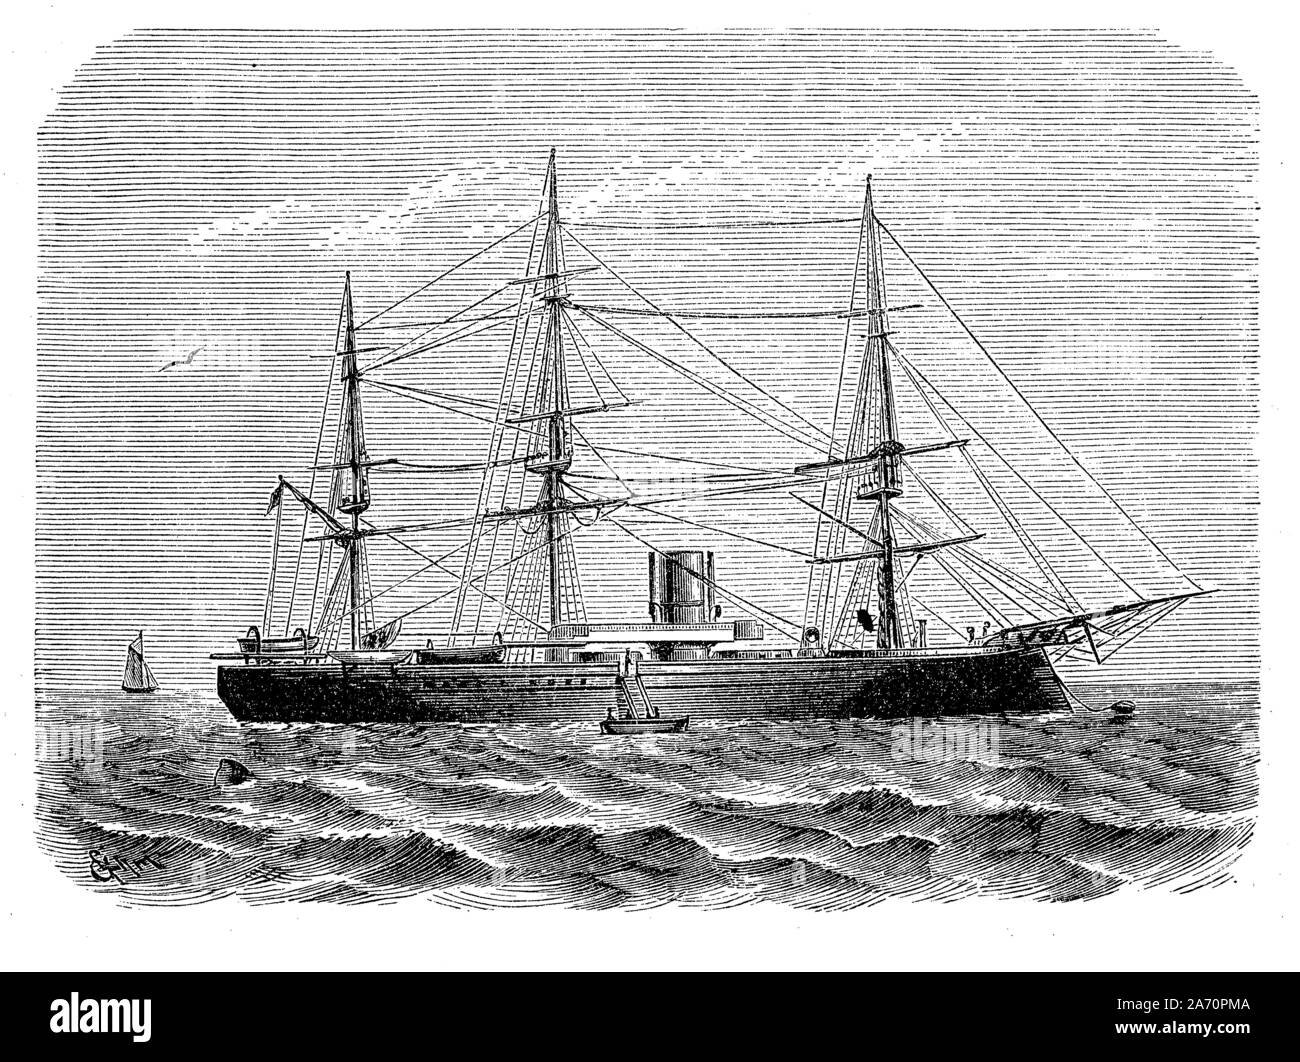 Prussian turret ship of the 19th century: turrets were normally cylindrical mounted on ironclad naval ship armed with one or more large-calibre guns Stock Photo